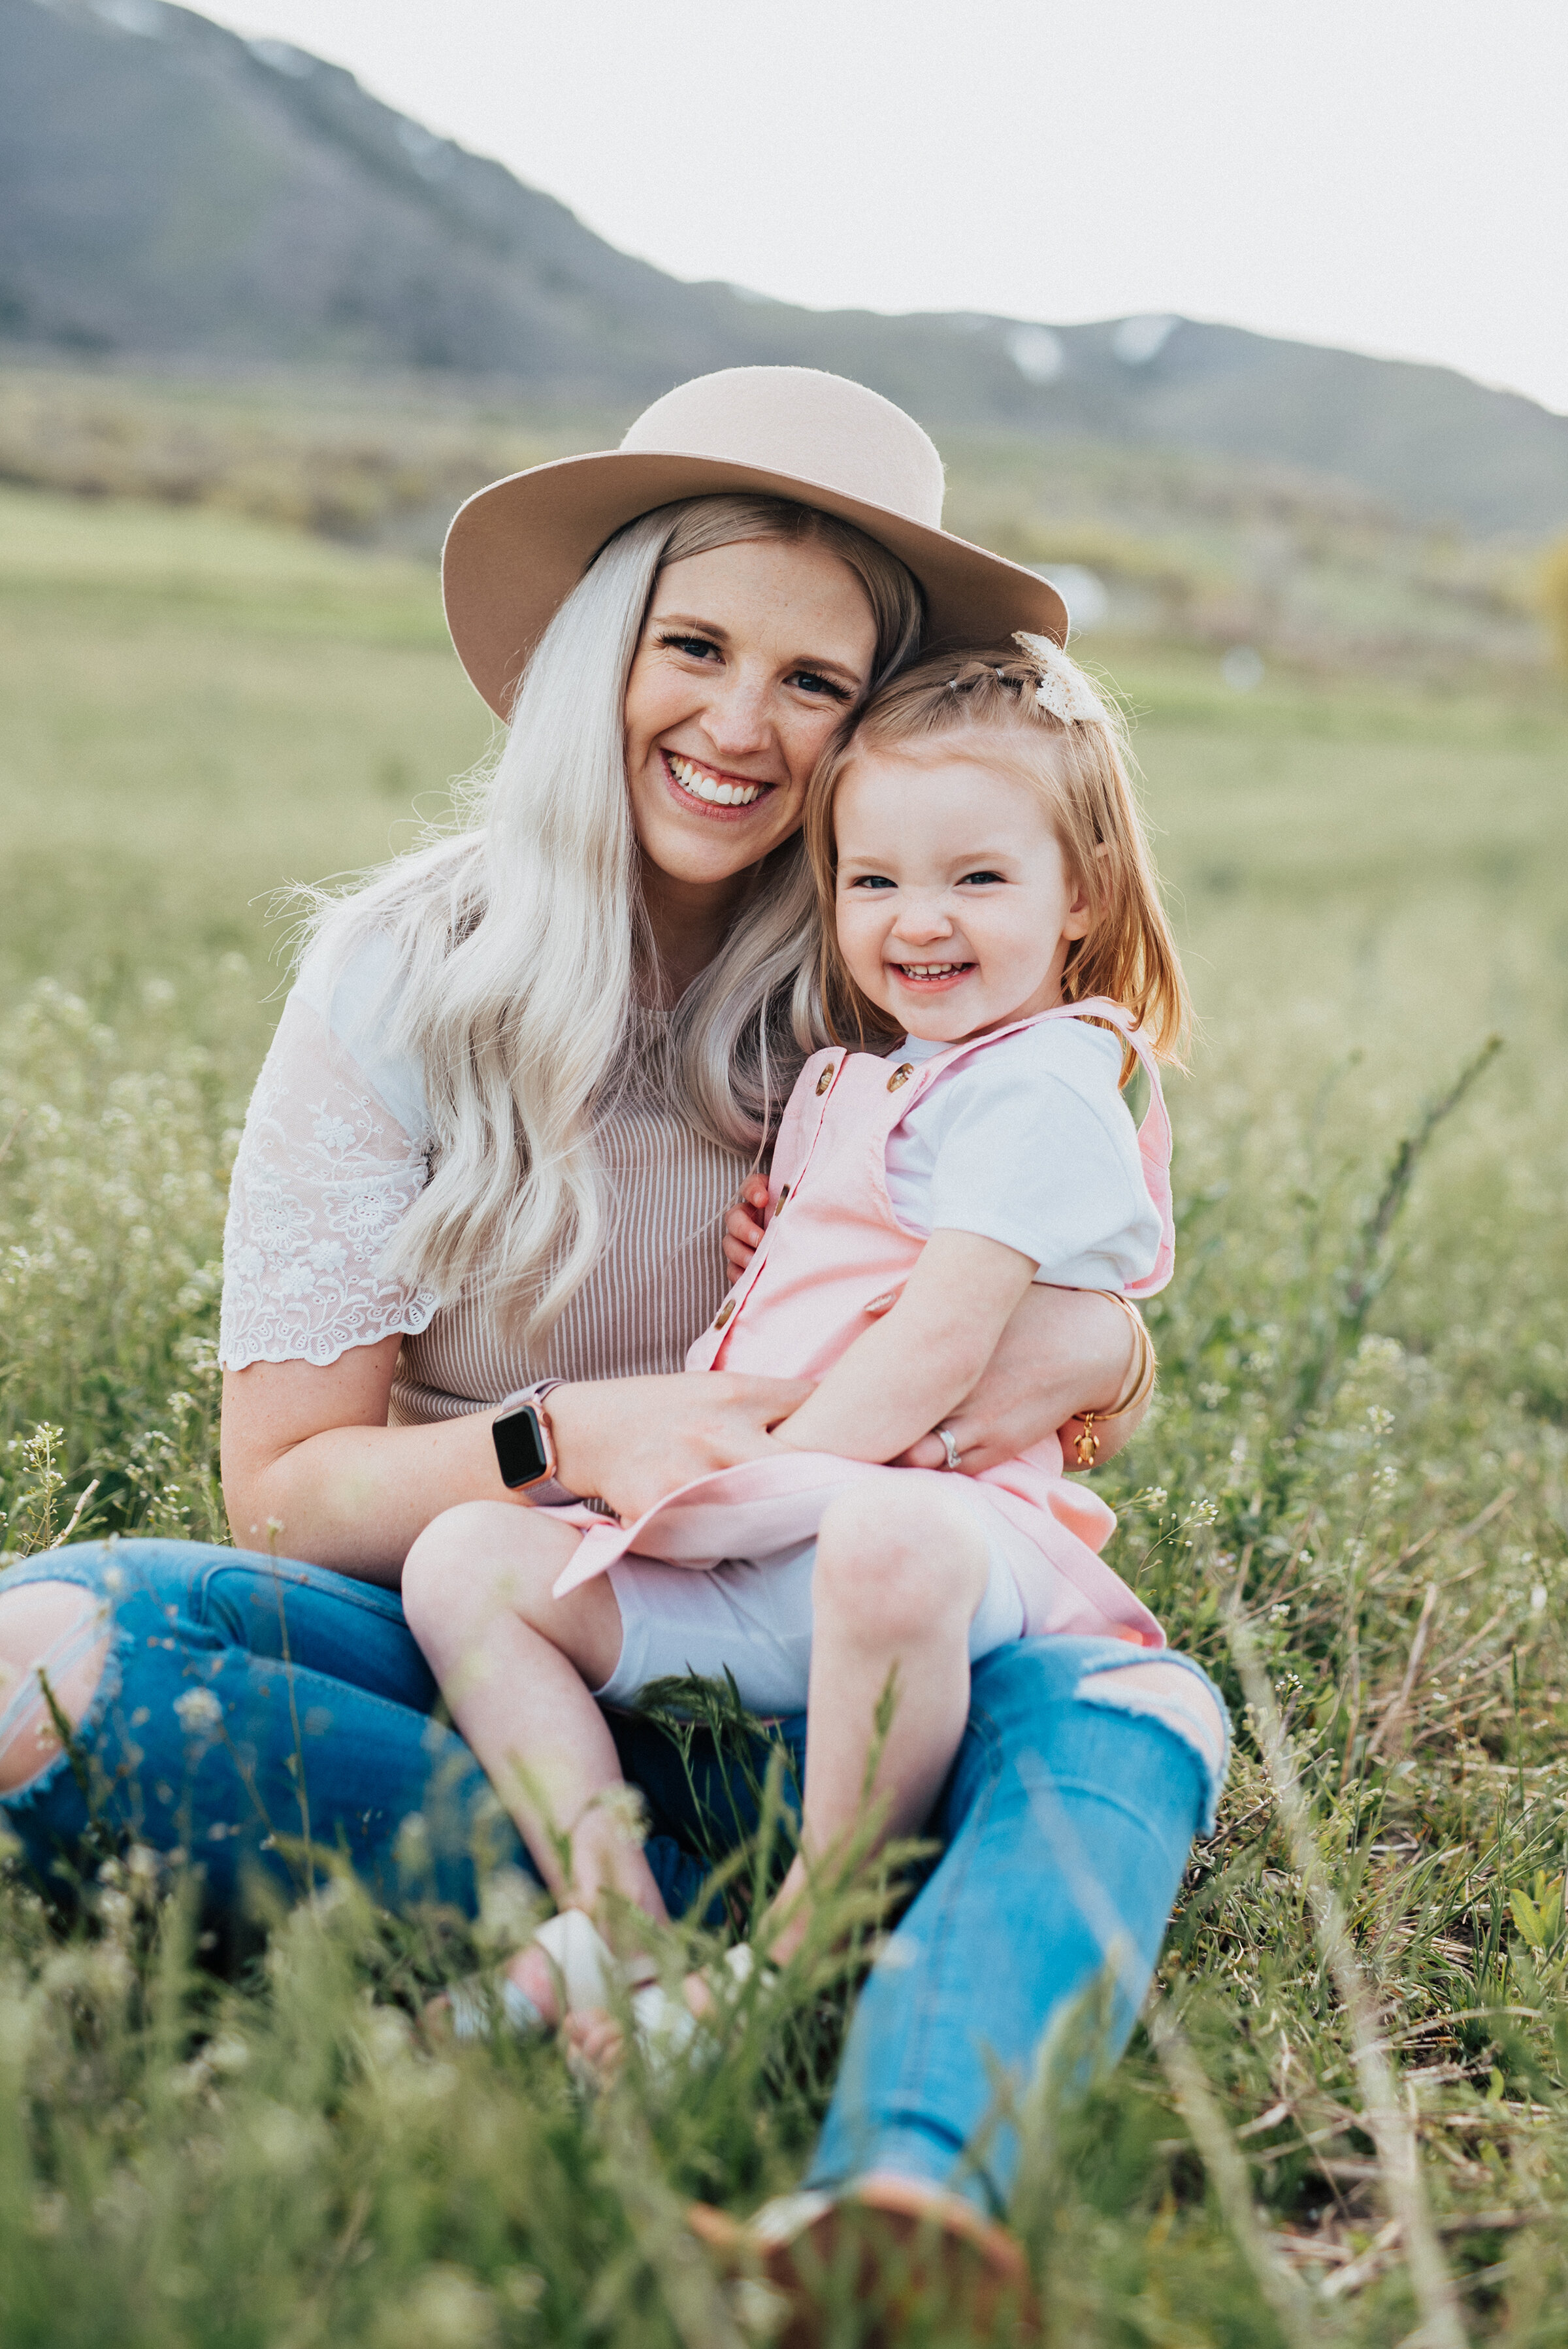  Mom smiles while holding daughter in the grass during a beautiful logan utah photography session with Kristi Alyse Photography. Mom ofgirls photo inspiration laughing photo ideas candid photography family portraits logan utah photographer laughter in photography #livelaugh #kristialysephotography #kristialyse #photography #photos #laughingportraits #momofgirls #saycheese #adventurephotoshoot 